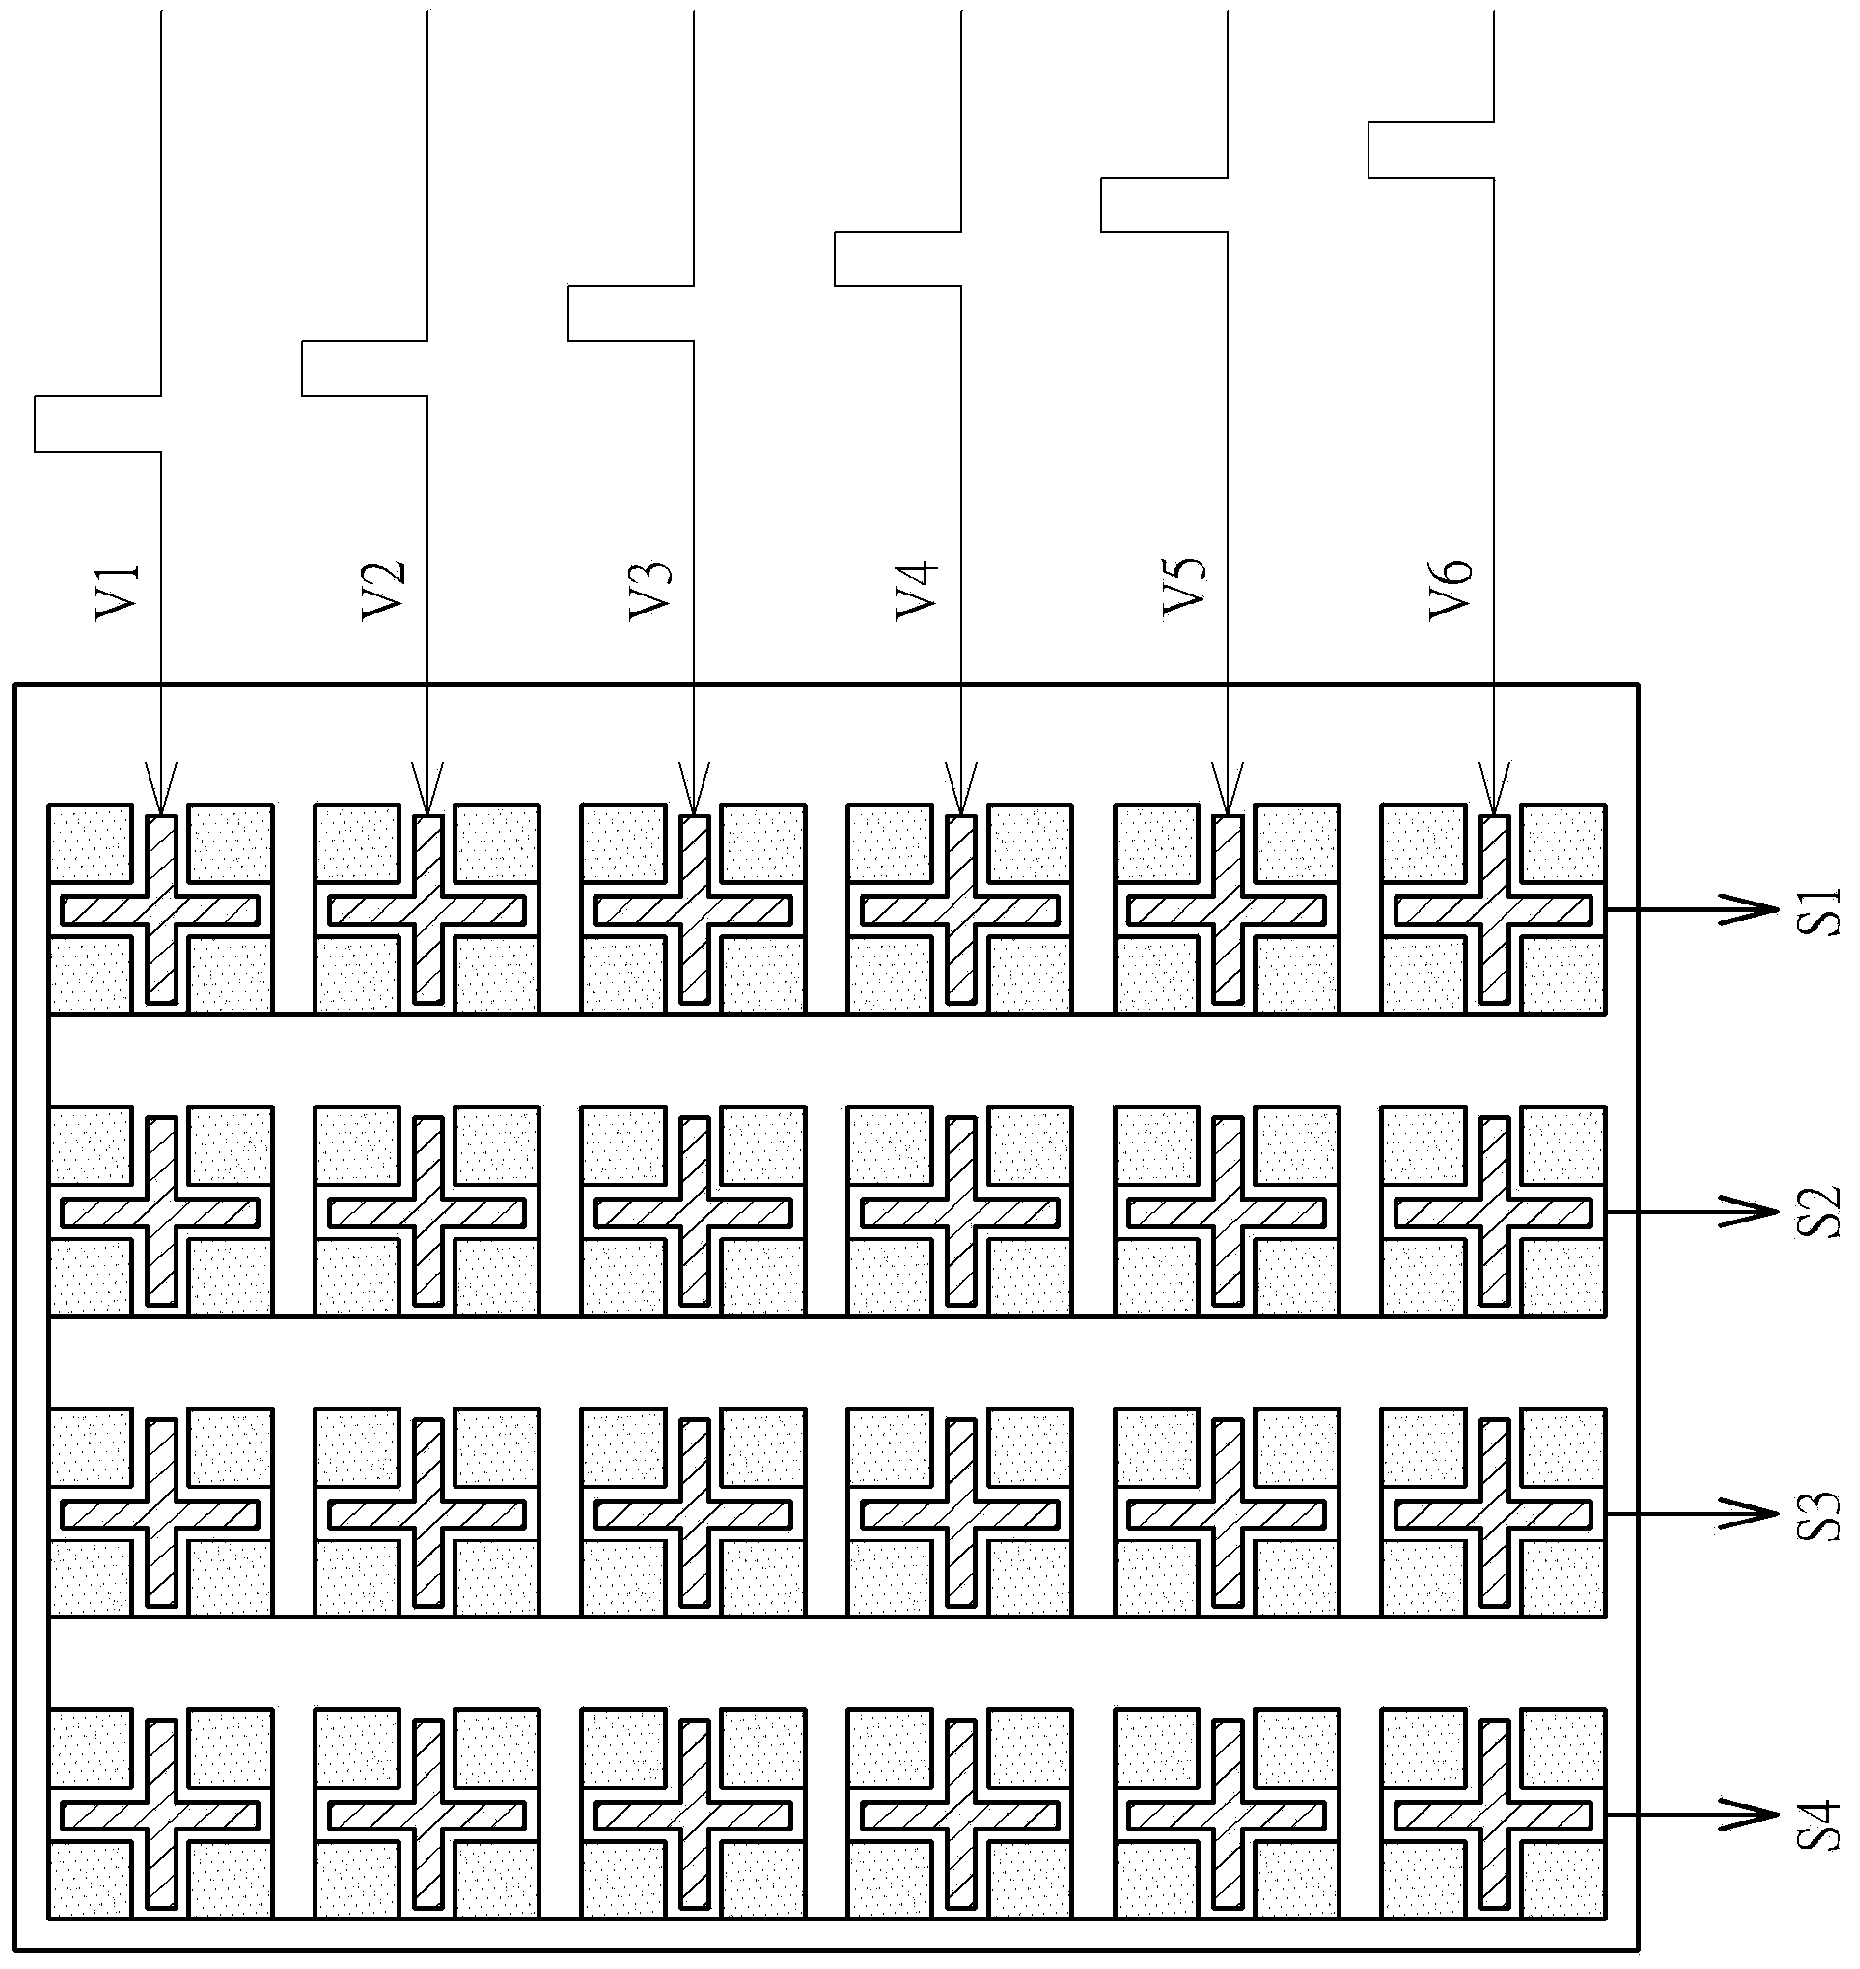 Drive induction method of single layer multipoint mutual capacitive touch screen